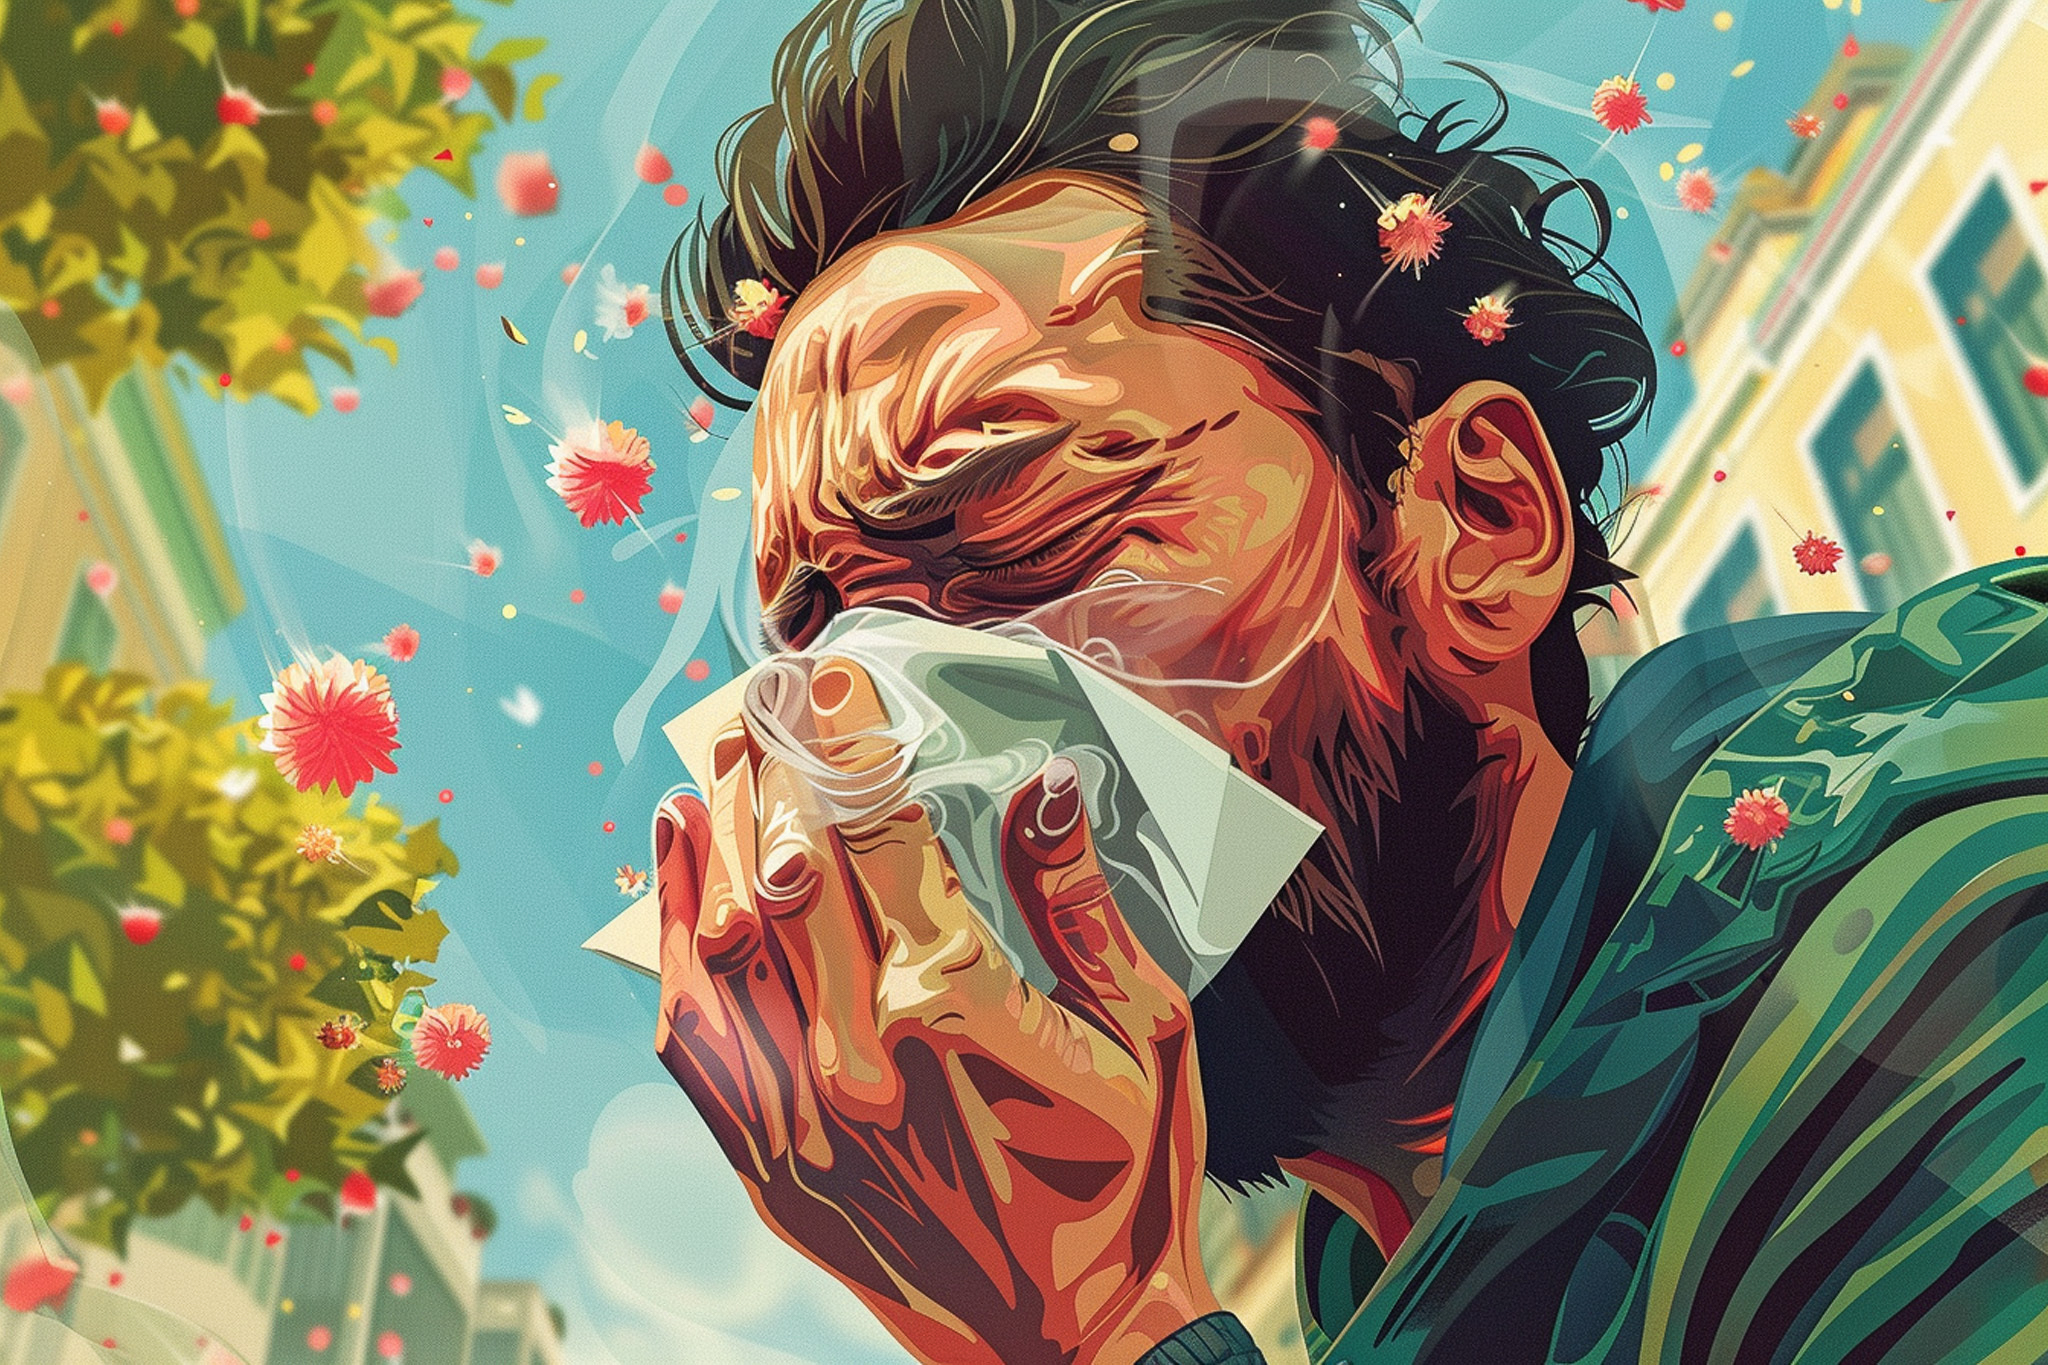 A man sneezes into a tissue, surrounded by floating red flowers and a vibrant city backdrop, in a colorful, stylized illustration.